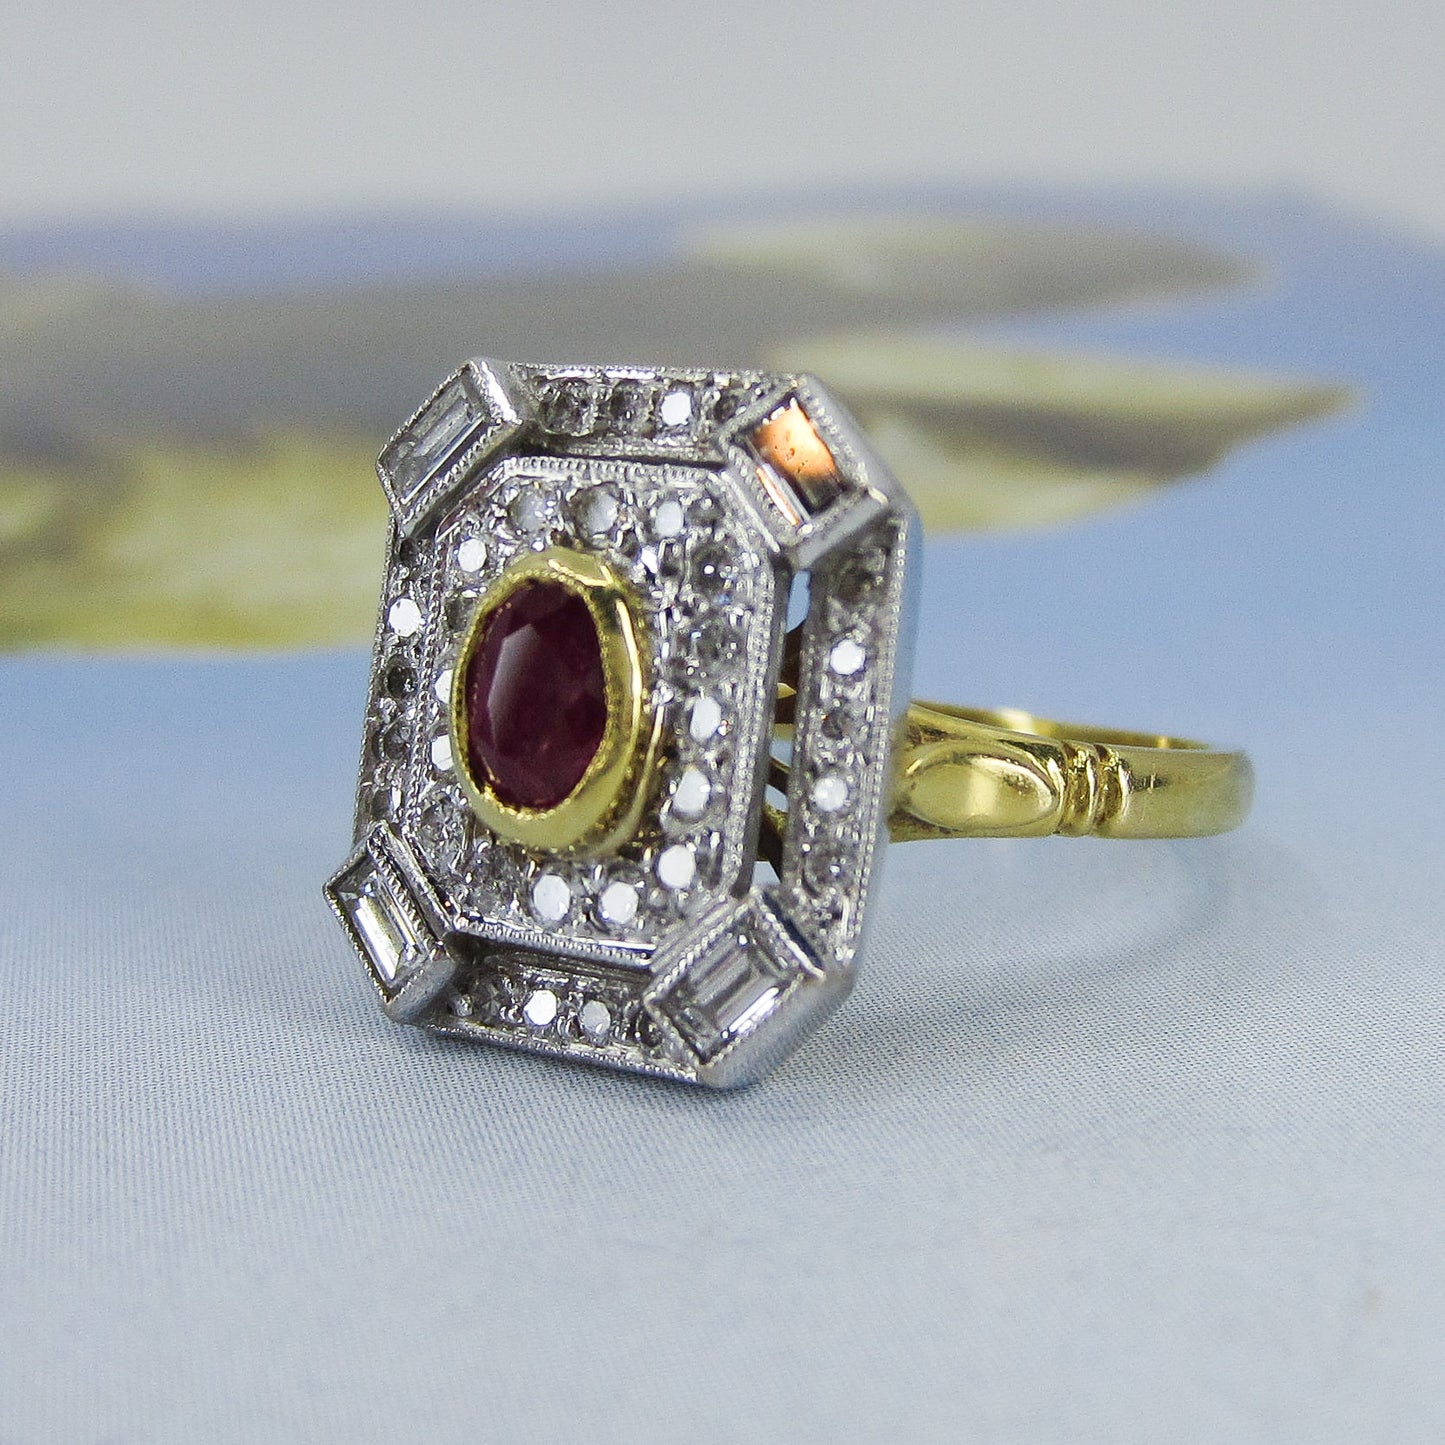 SOLD--Vintage Ruby and Diamond Ring 18k, British c. 1988